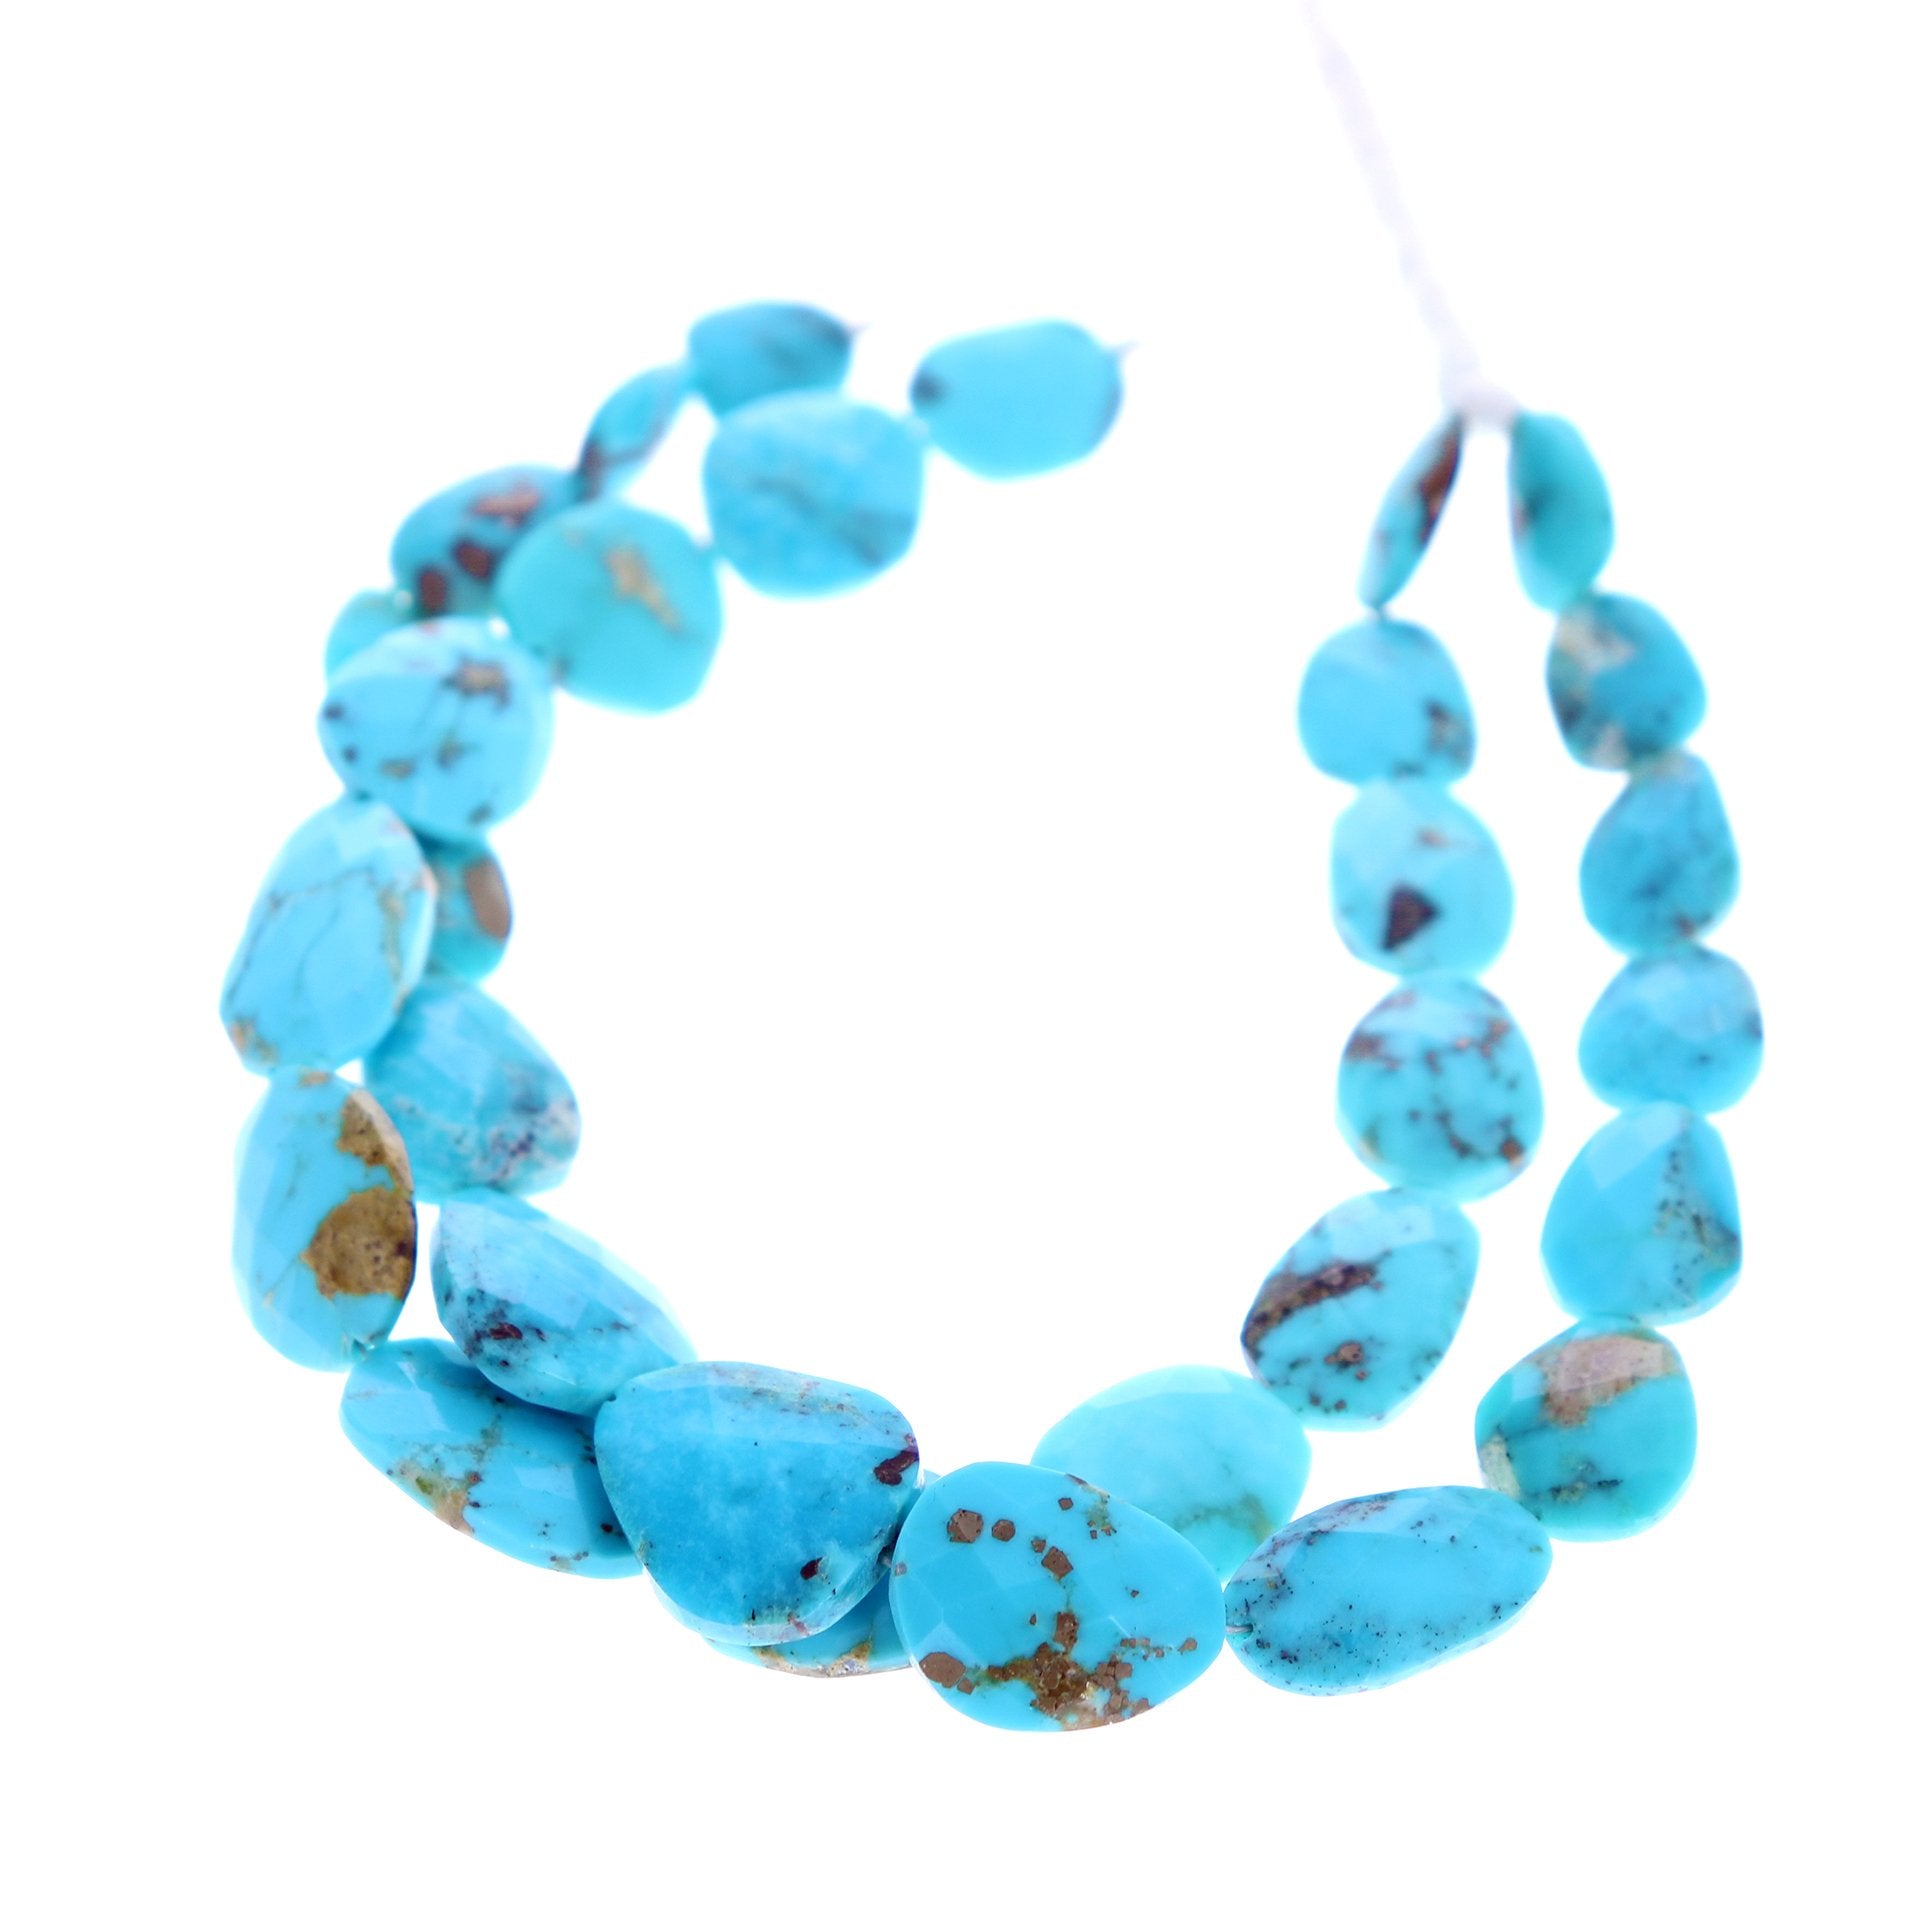 Sleeping Beauty Turquoise Beads Faceted Free Forms Large 8.25" -NewWorldGems